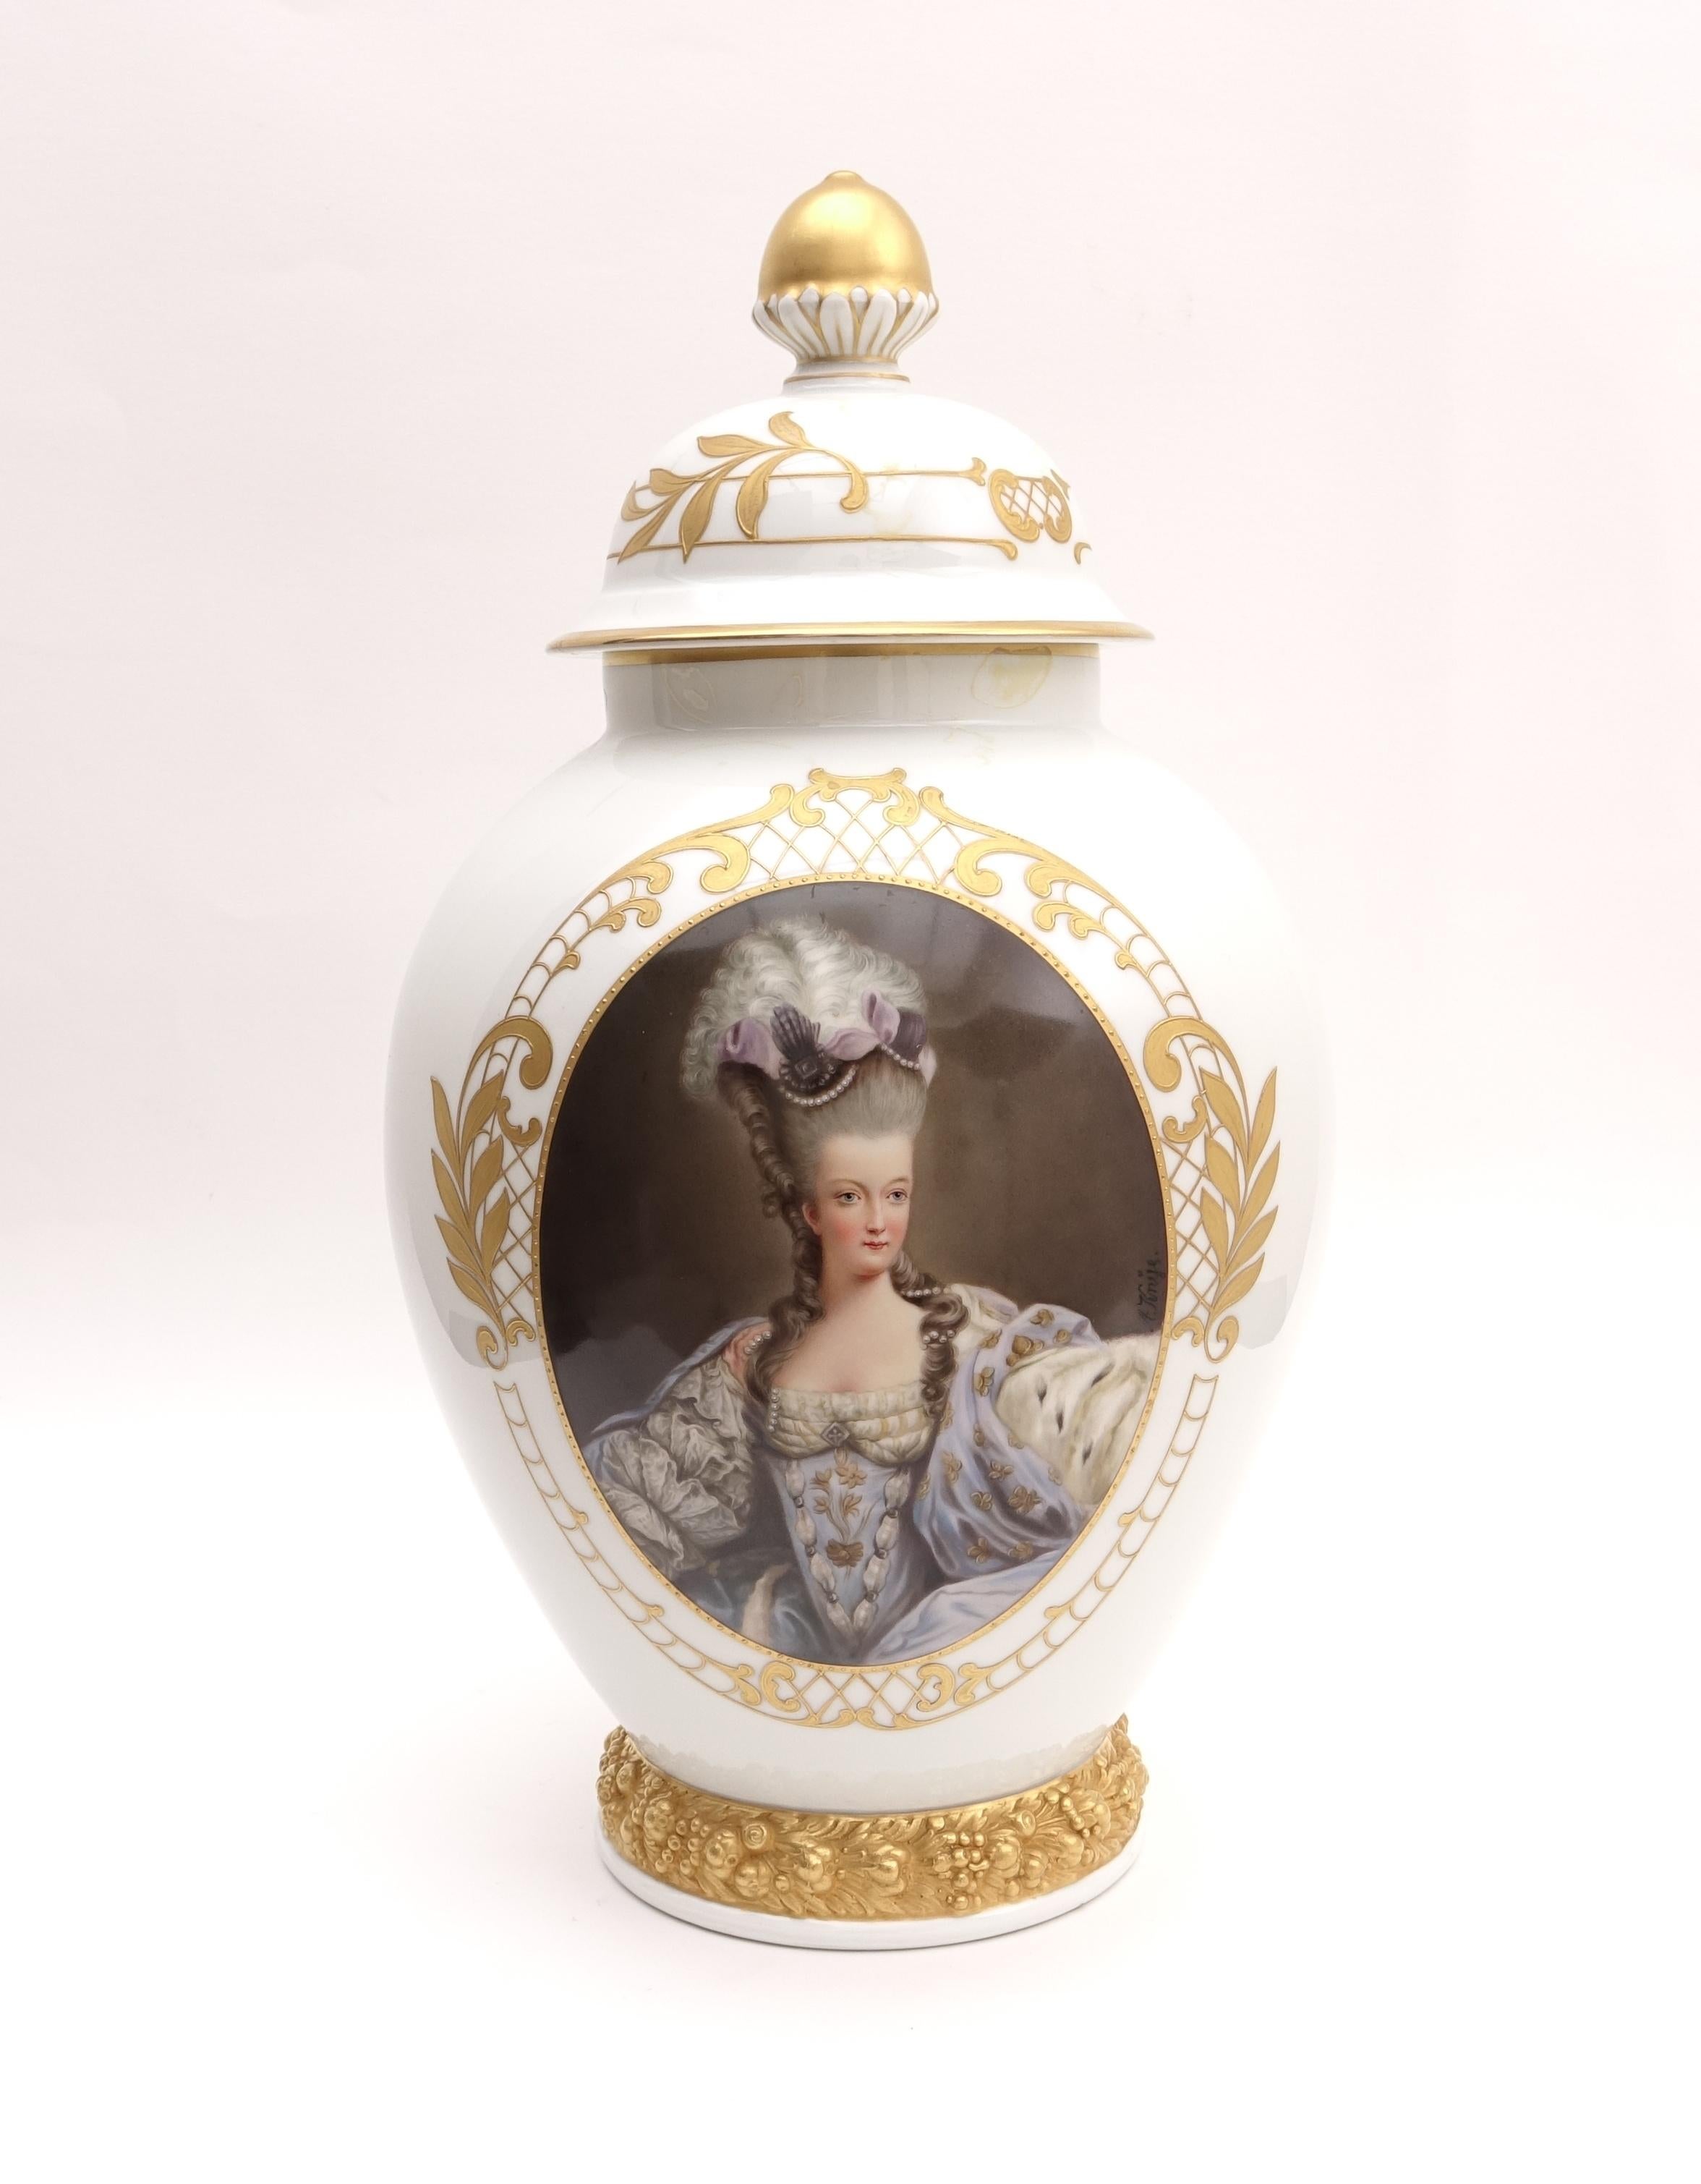 Porcelain vase depicting Marie Antoinette
Signed painting: A Knys.
Rosenthal porcelain - Selb Bavaria

Measurements: Diameter 23 cm - Height 39 cm
The work in question requires a certificate of free circulation to be shipped. This certificate